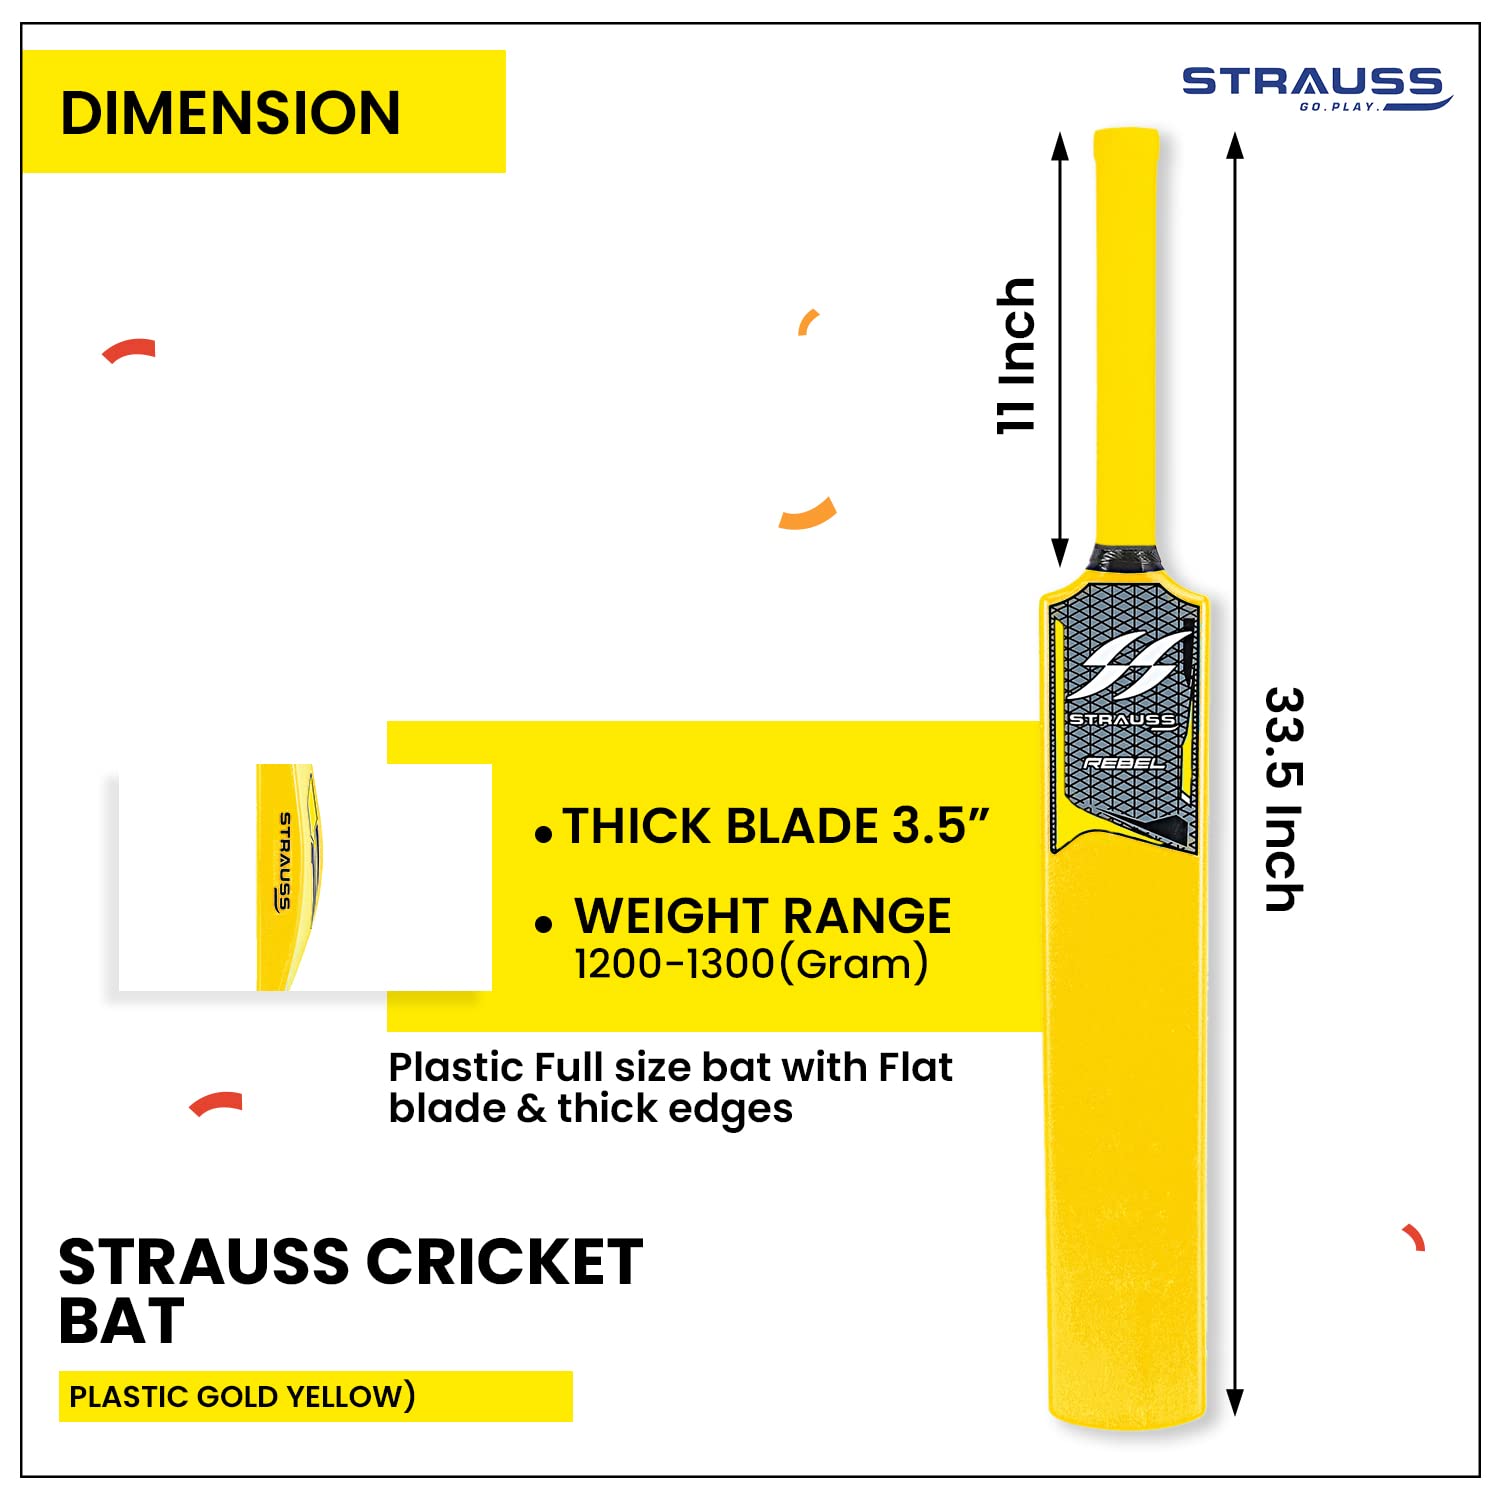 Strauss Rebel Cricket Bat | Full Size | Dimensions: 34 X 4.5 inch | Heavy Duty Hard PVC/Plastic Cricket Bat | Color: Golden Yellow | For All Age Groups | Tennis & Synthetic Ball Cricket Bat | Tennis Cricket Bat